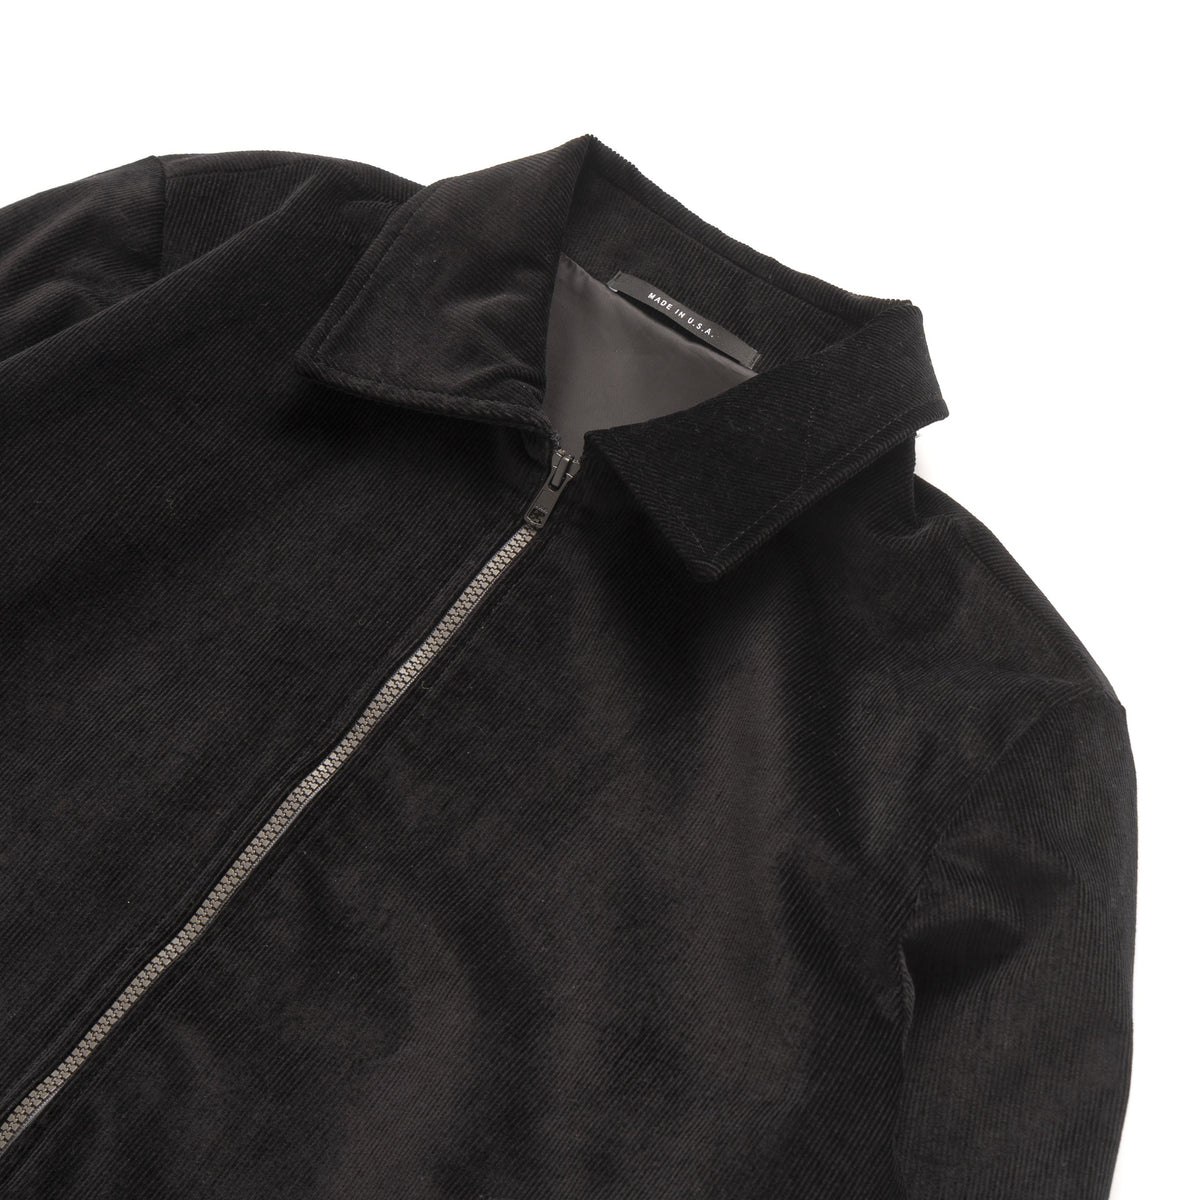 Bomber - Black Stretch Corduroy Outerwear Commonwealth Proper